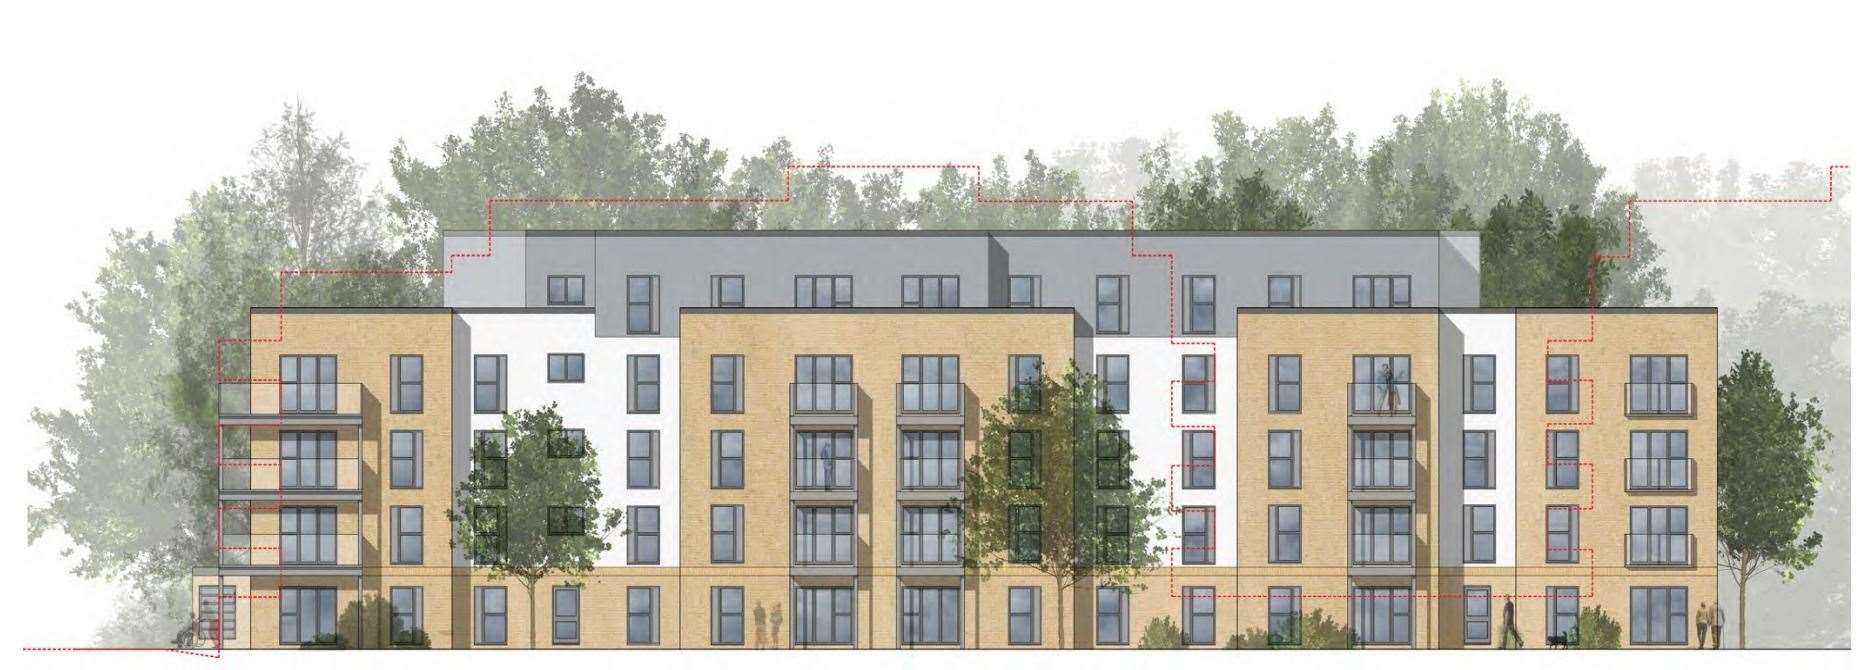 The new development on Fairfield Road, Broadstairs will have 52 flats over five floors